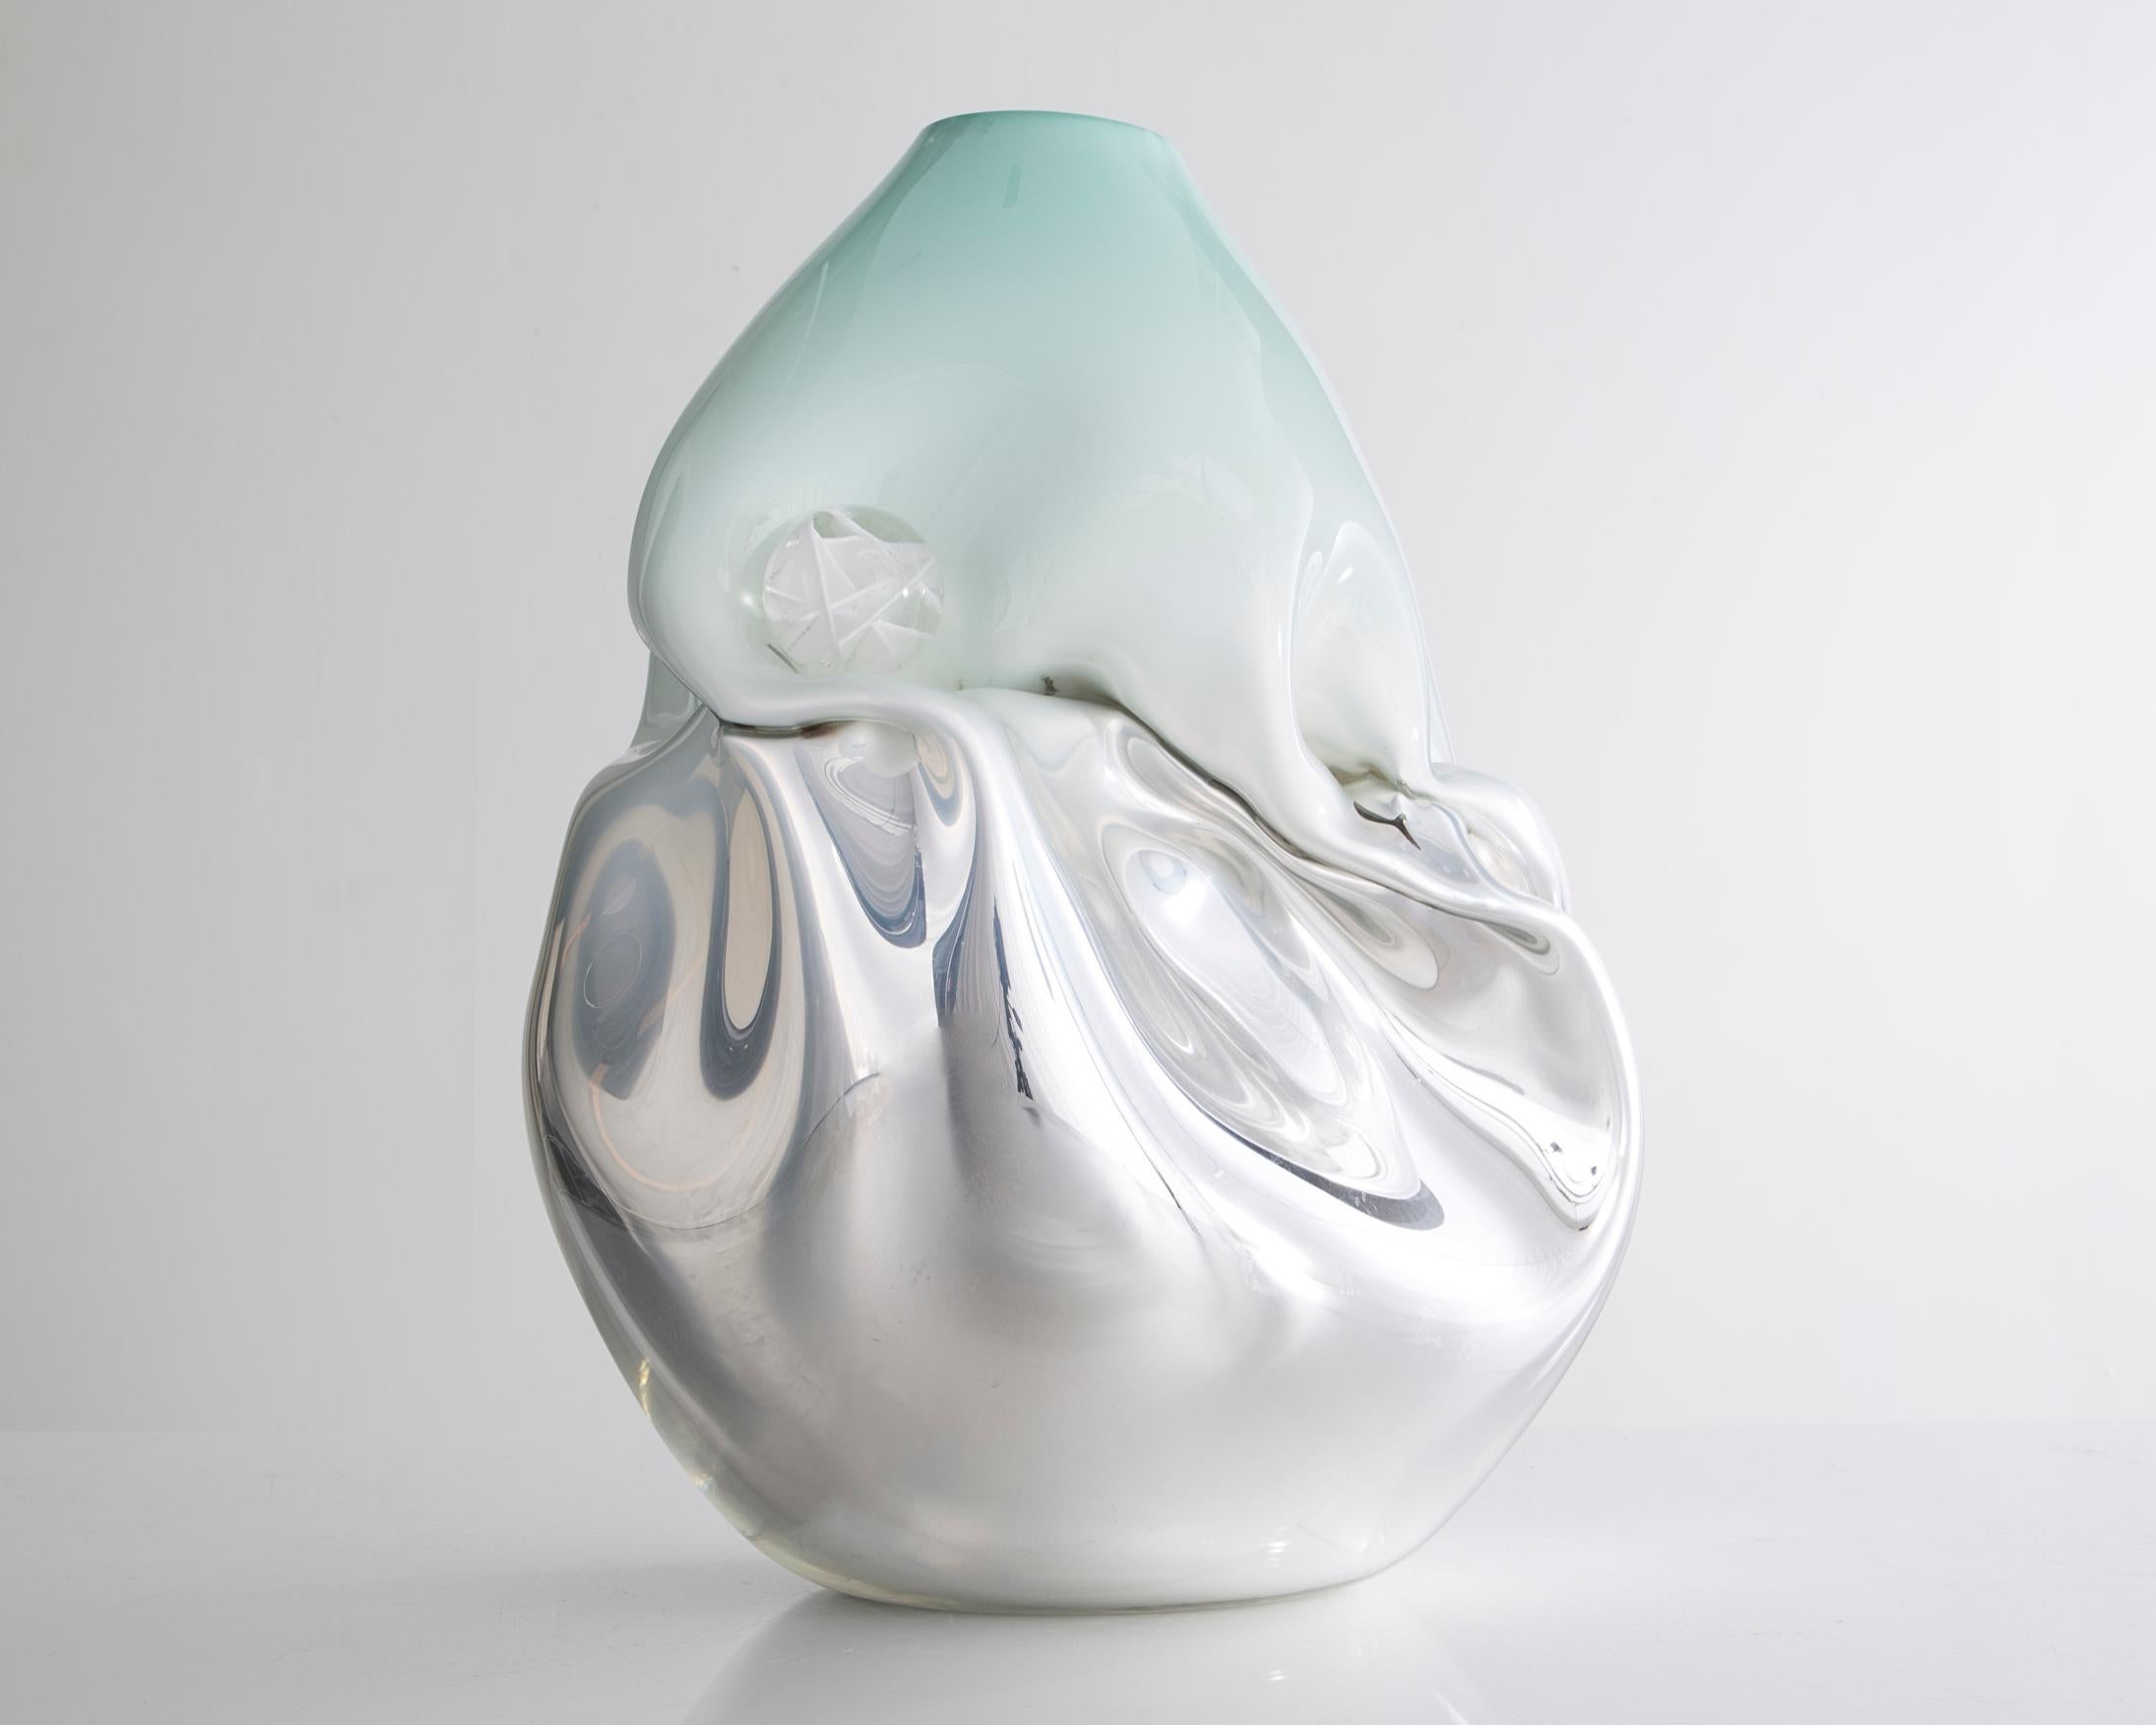 American Unique Crumpled Vessel in Silver Mirrored Glass by Jeff Zimmerman, 2010